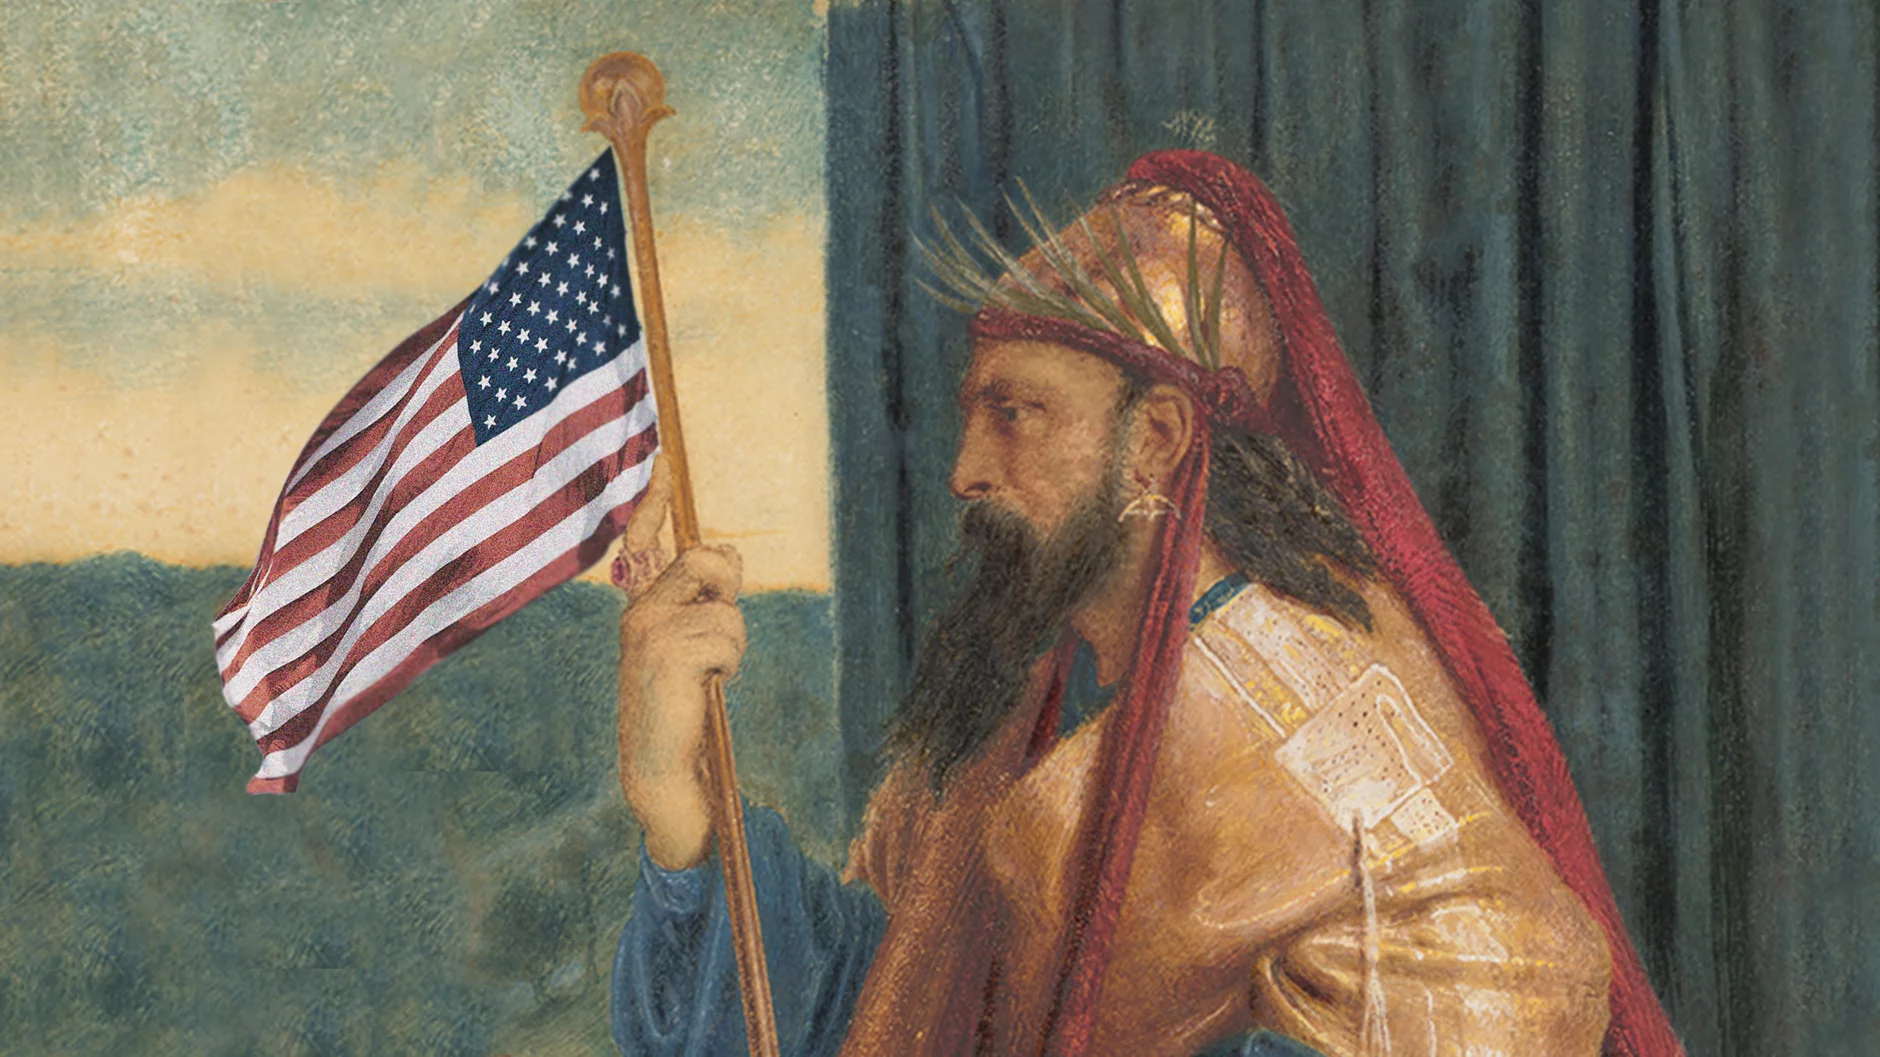 King Solomon’s Advice to Americans in 2023